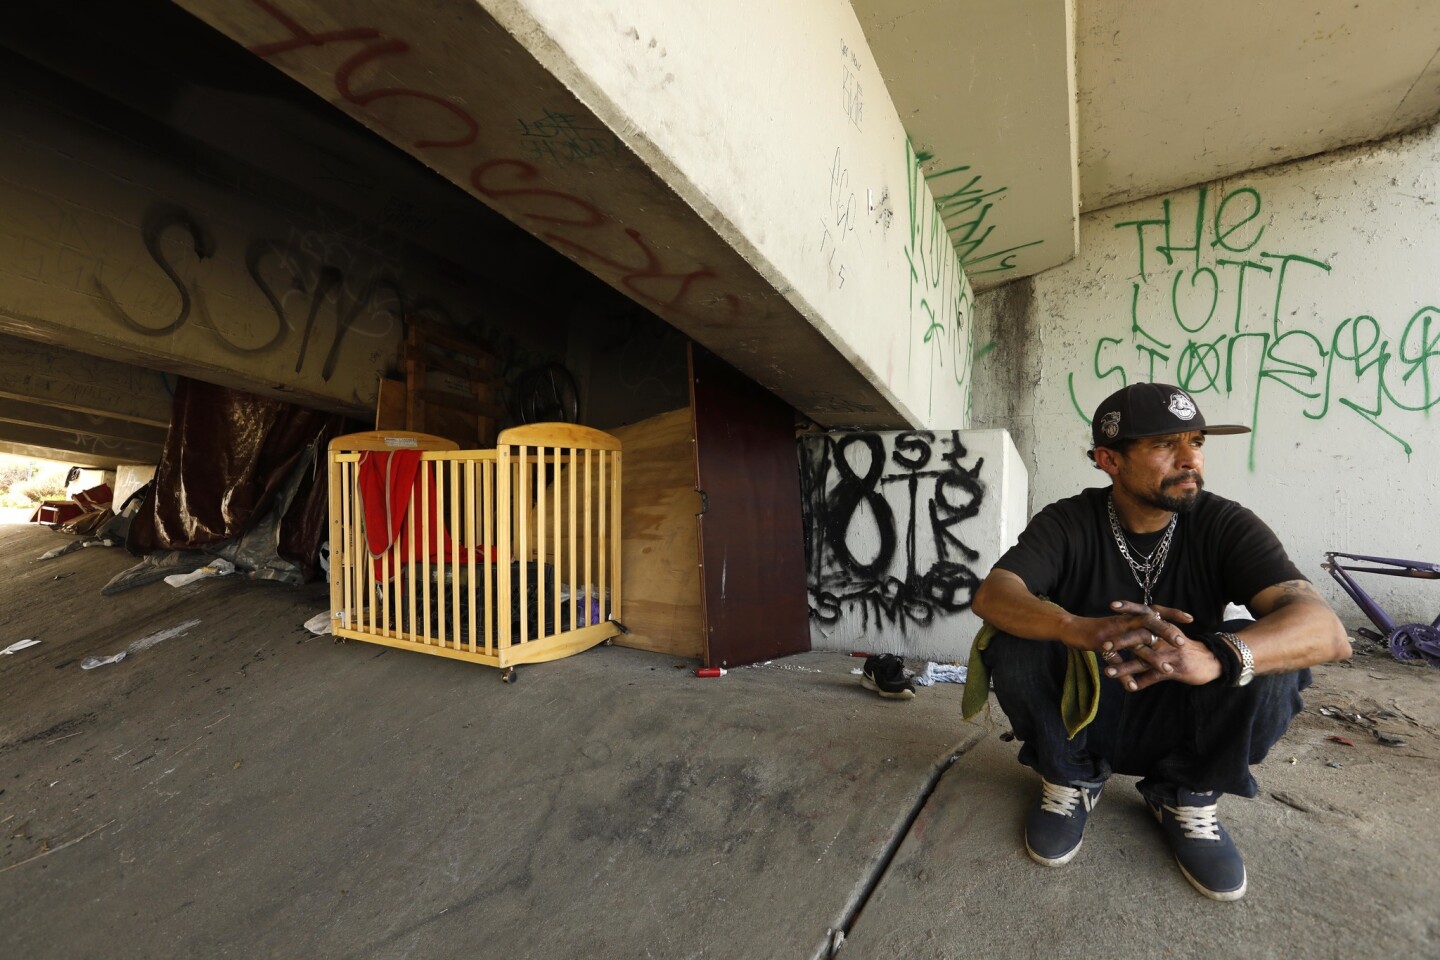 Manuel Pajar, 40 sits near his camp under an overpass during the 2019 Greater Los Angeles Homeless Count in the City of Commerce on Thursday. Pajar has been homeless for the past 9 years.